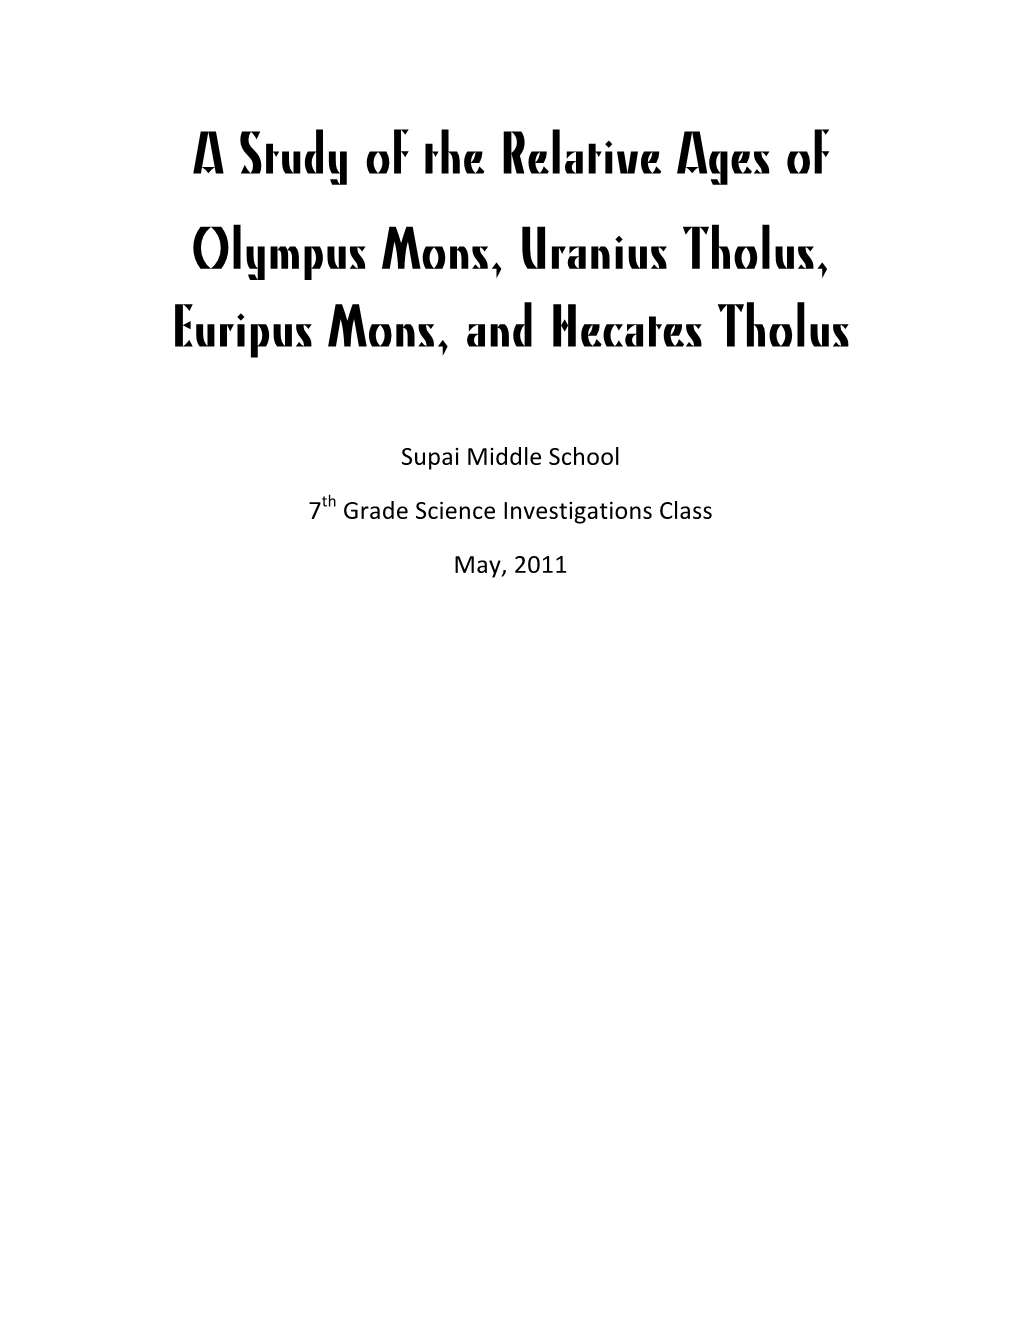 A Study of the Relative Ages of Olympus Mons, Uranius Tholus, Euripus Mons, and Hecates Tholus